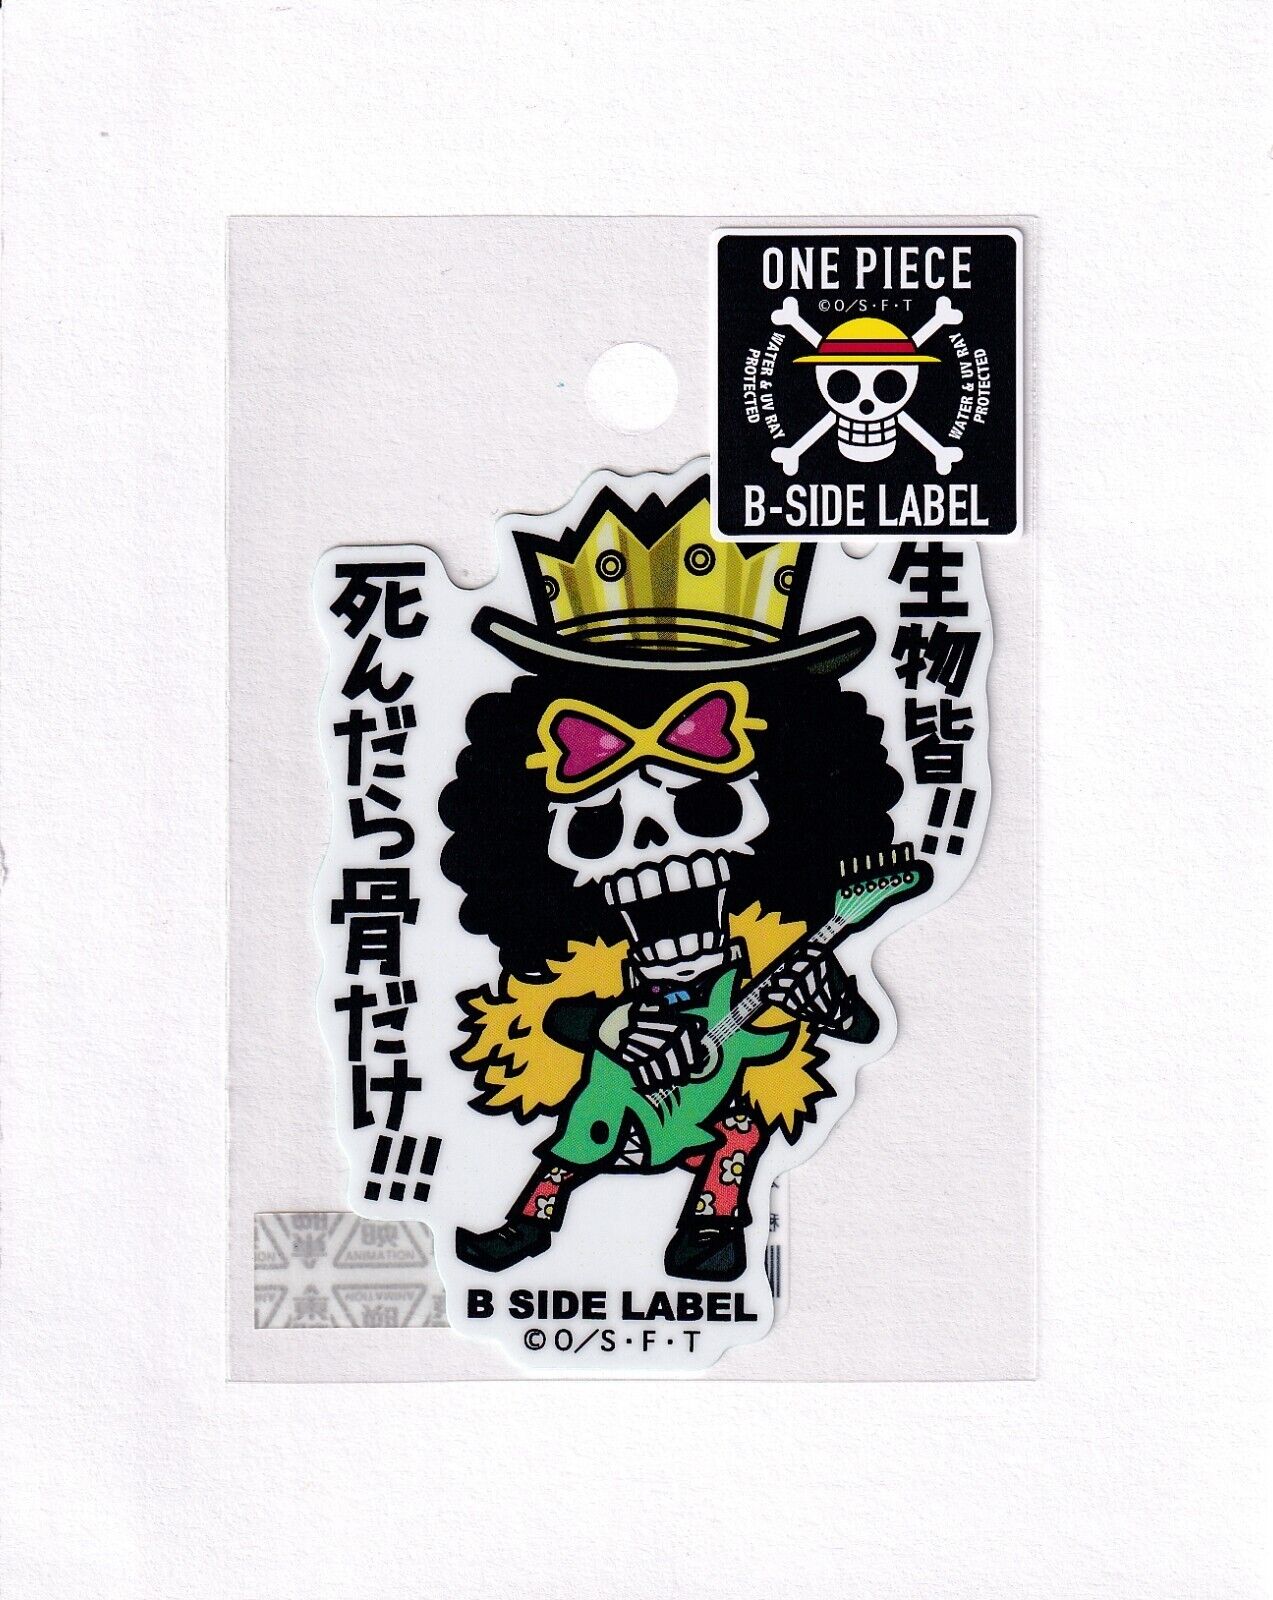 One Piece B-SIDE LABEL small Sticker Post Time skip Brook